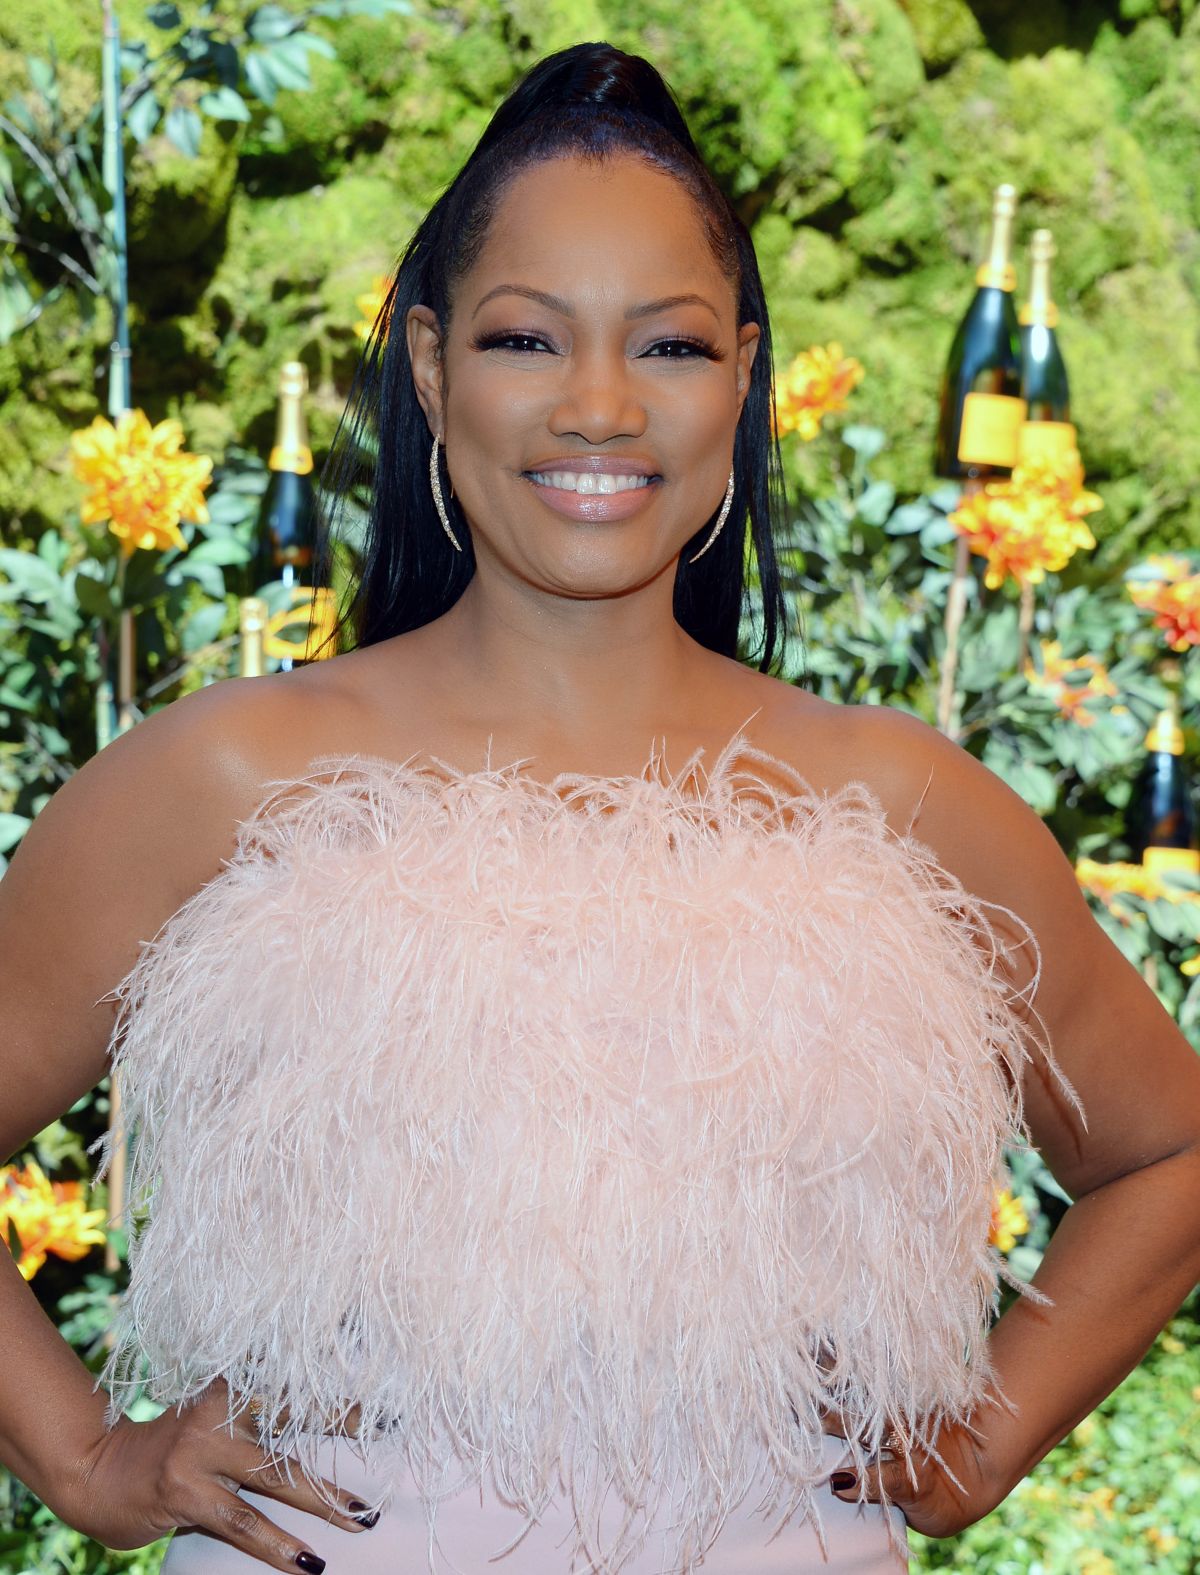 garcelle-beauvais-at-veuve-clicquot-polo-classic-at-will-rogers-state-park-in-los-angeles-10-05-2019-8.jpg